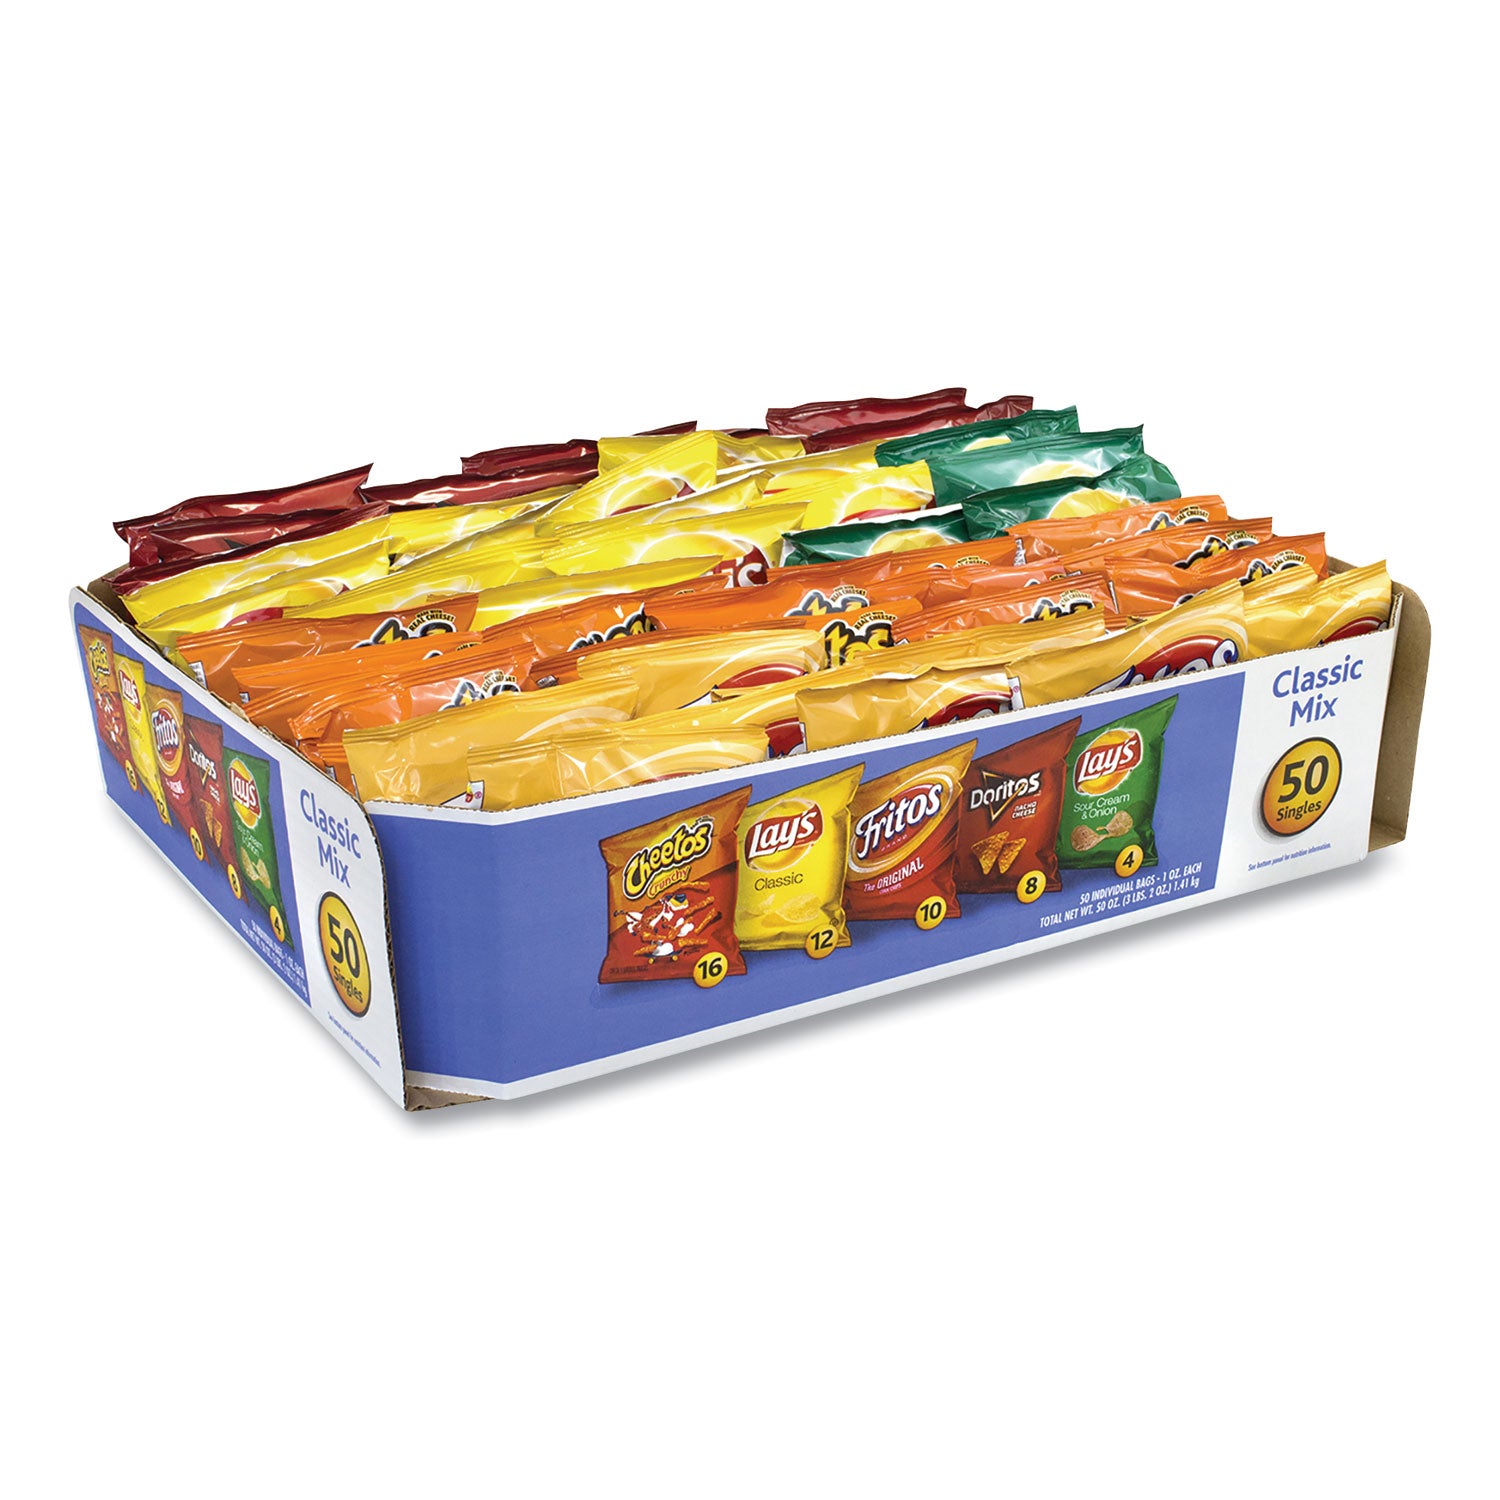 potato-chips-bags-variety-pack-assorted-flavors-1-oz-bag-50-bags-carton-ships-in-1-3-business-days_grr22000403 - 1